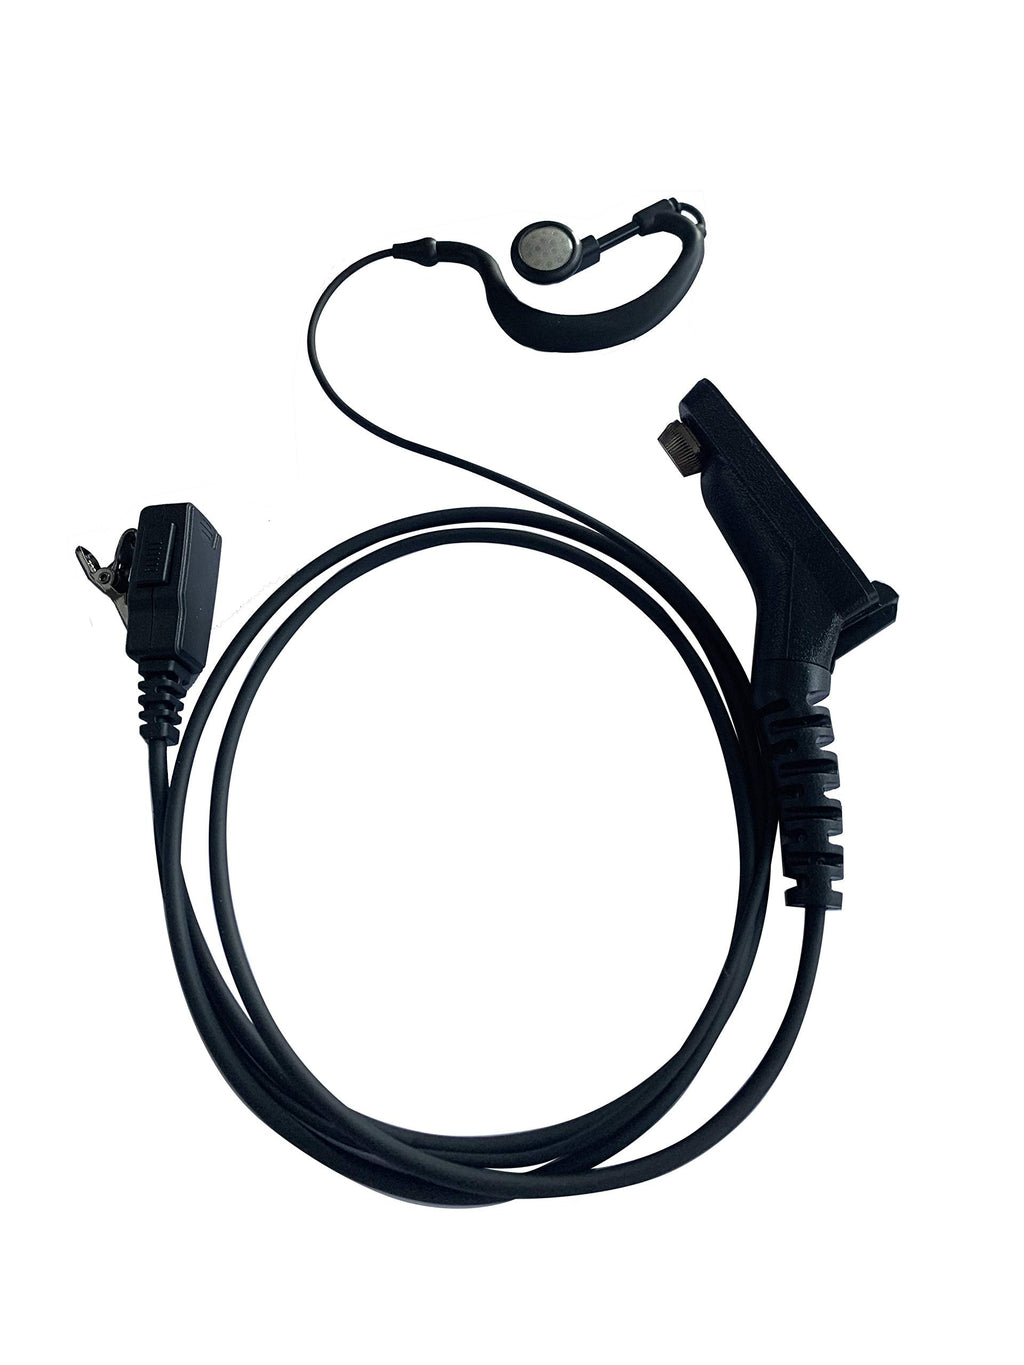 [Australia - AusPower] - Earpiece and Microphone Headset for Motorola XPR 6350 XPR 6550 XPR 6300 XPR 6580 XPR 7550 APX 6000 APX 4000 APX 7000 APX 7000xe APX 8000 Two-Way Radios 